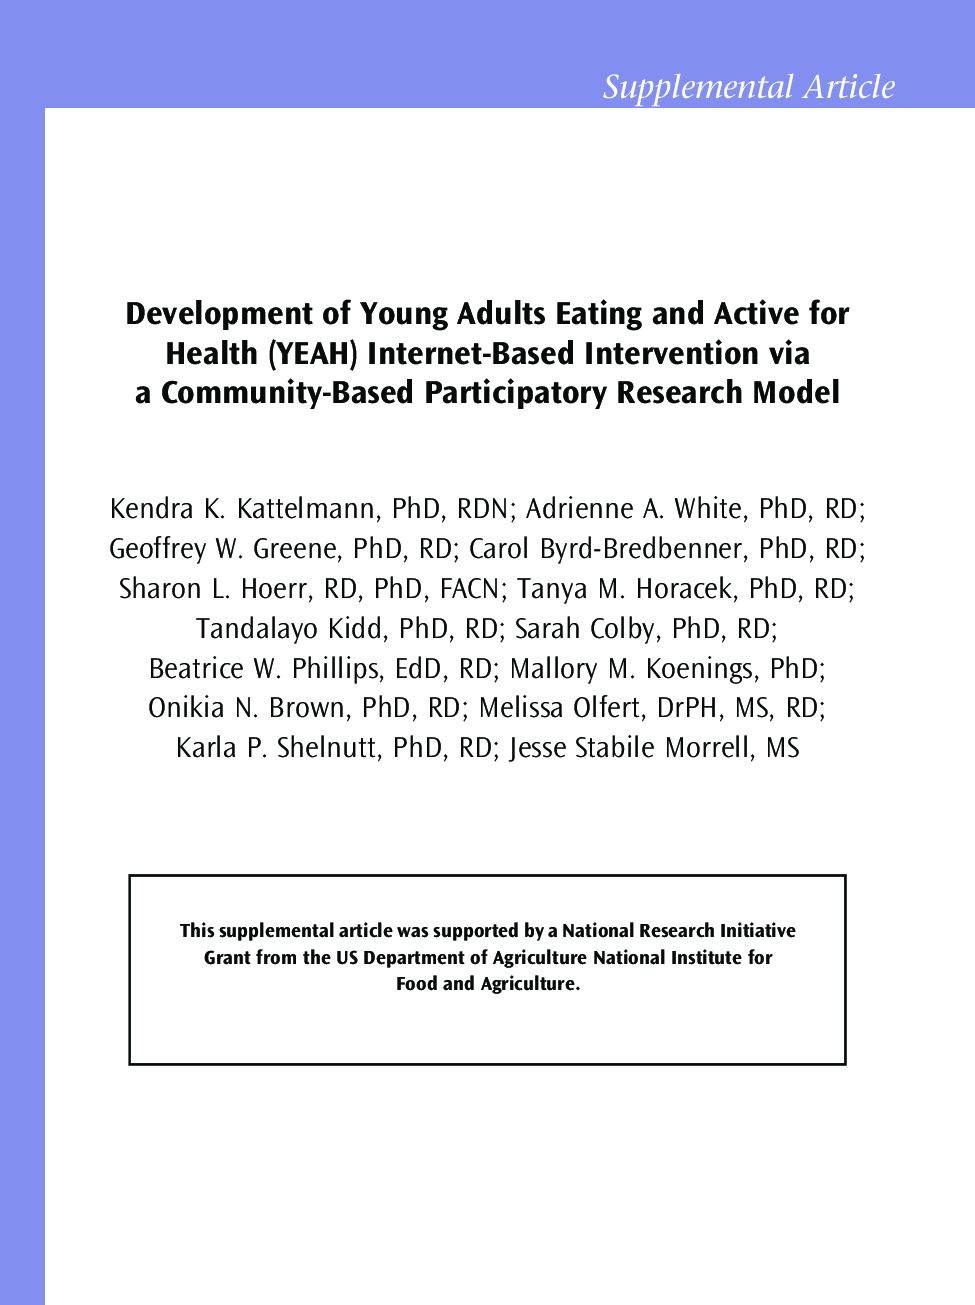 Development of Young Adults Eating and Active for Health (YEAH) Internet-Based Intervention via a Community-Based Participatory Research Model